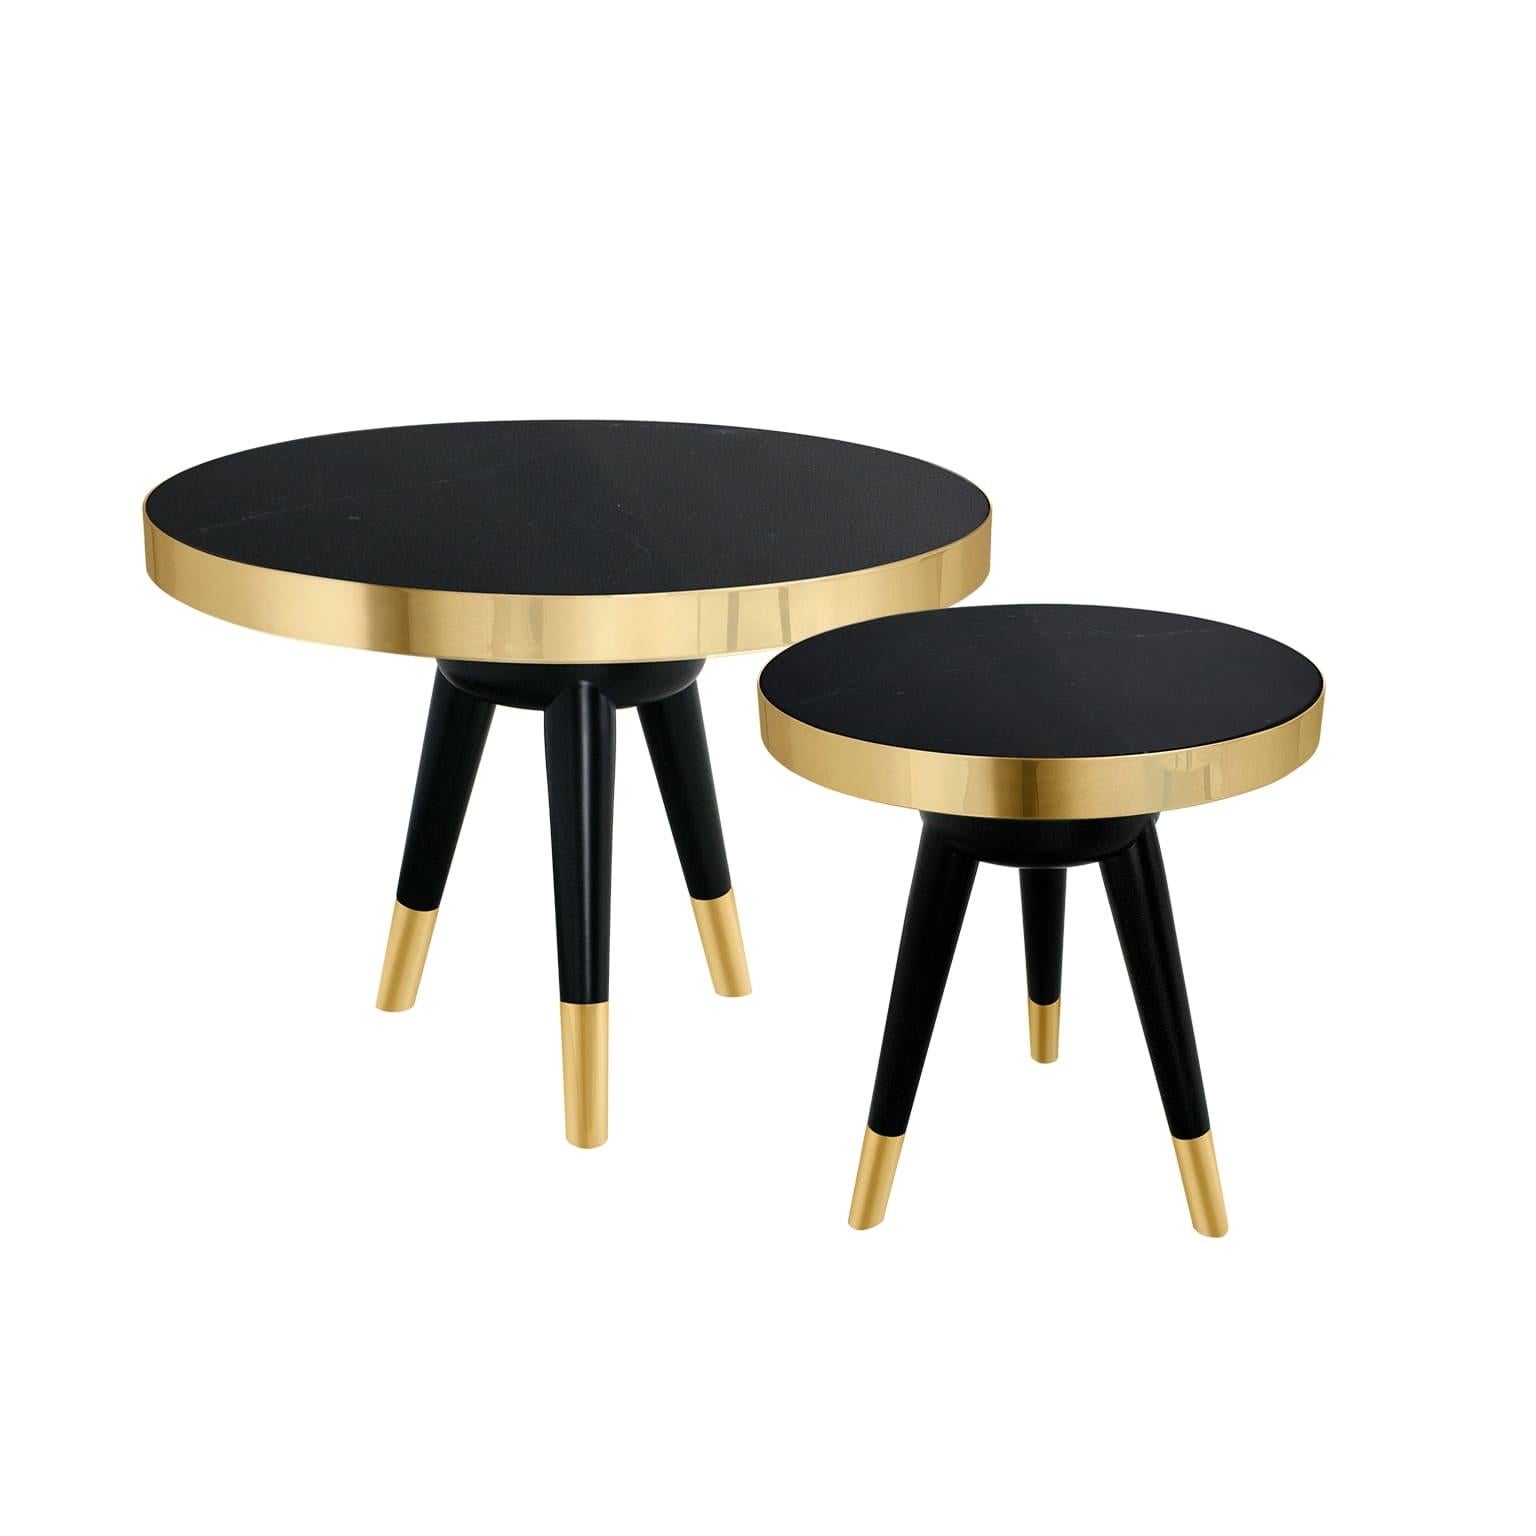 Arcadia Center Table is a modern mid-century influences blend. A four-layer center table with a 50s vibe is perfect for a modern interior design project. Due to its tops’ different heights, this coffee table can serve other purposes, such as